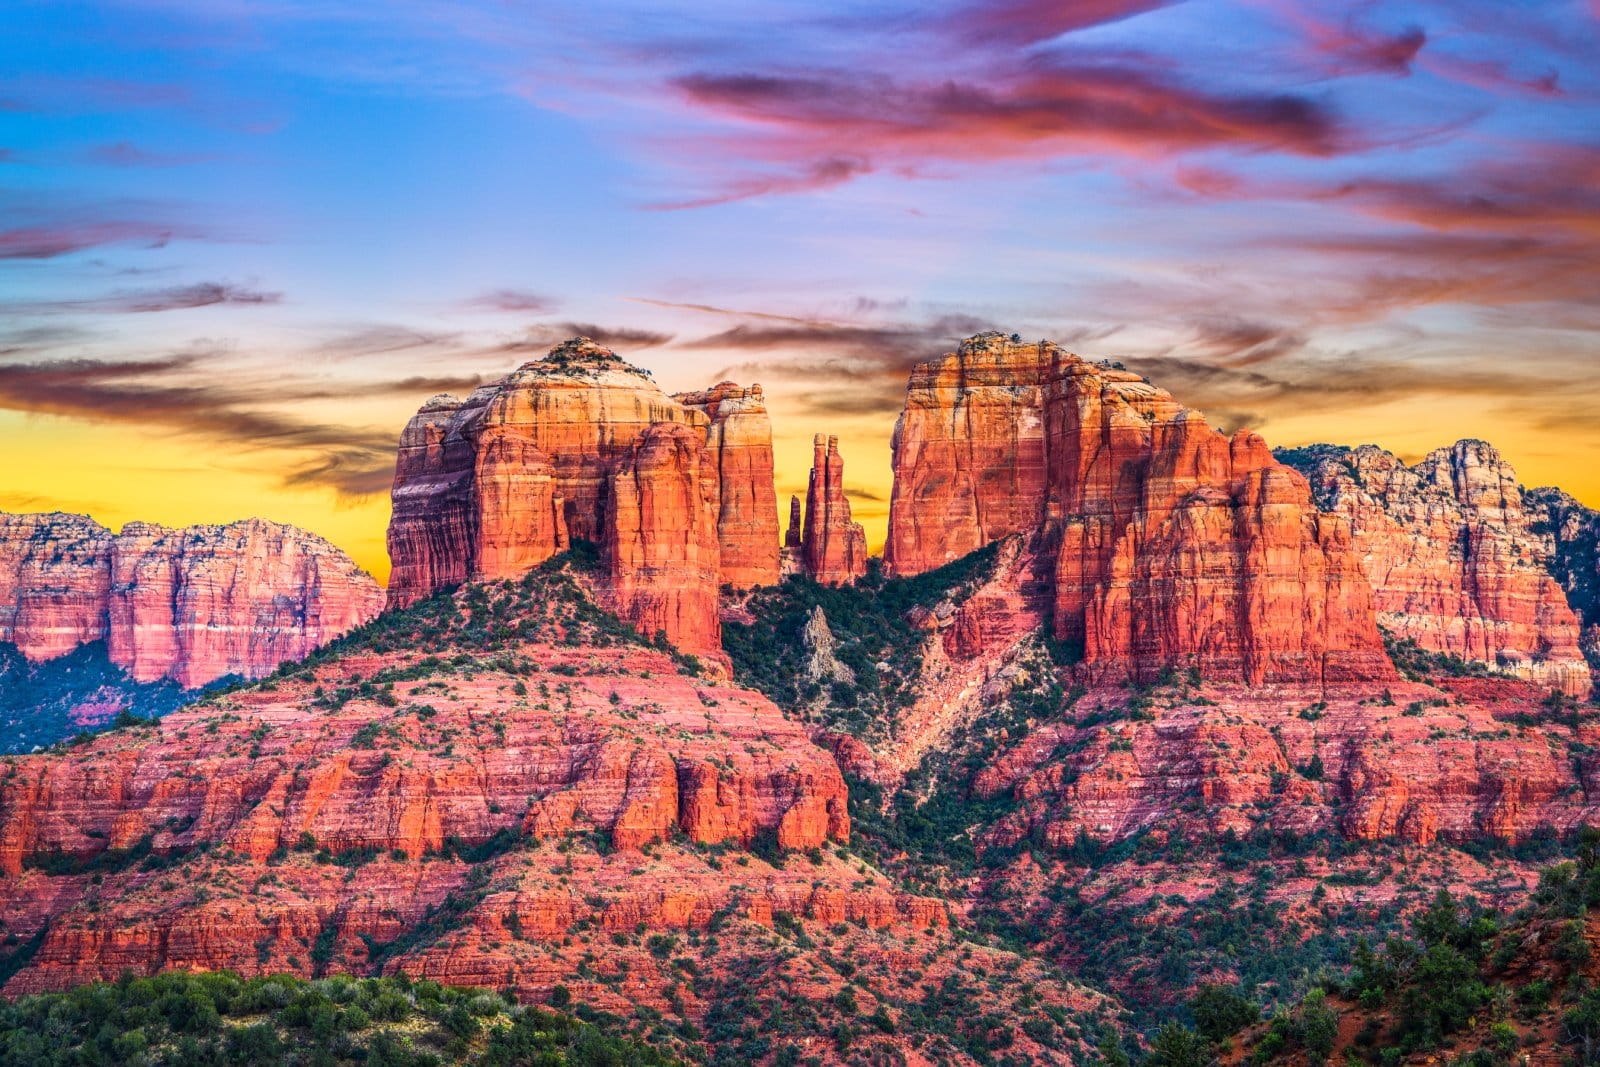 <p><span>Immerse yourself in the mystical atmosphere of Sedona’s red rock formations and spiritual energy, reminiscent of the awe-inspiring landscapes of the Middle East.</span></p>